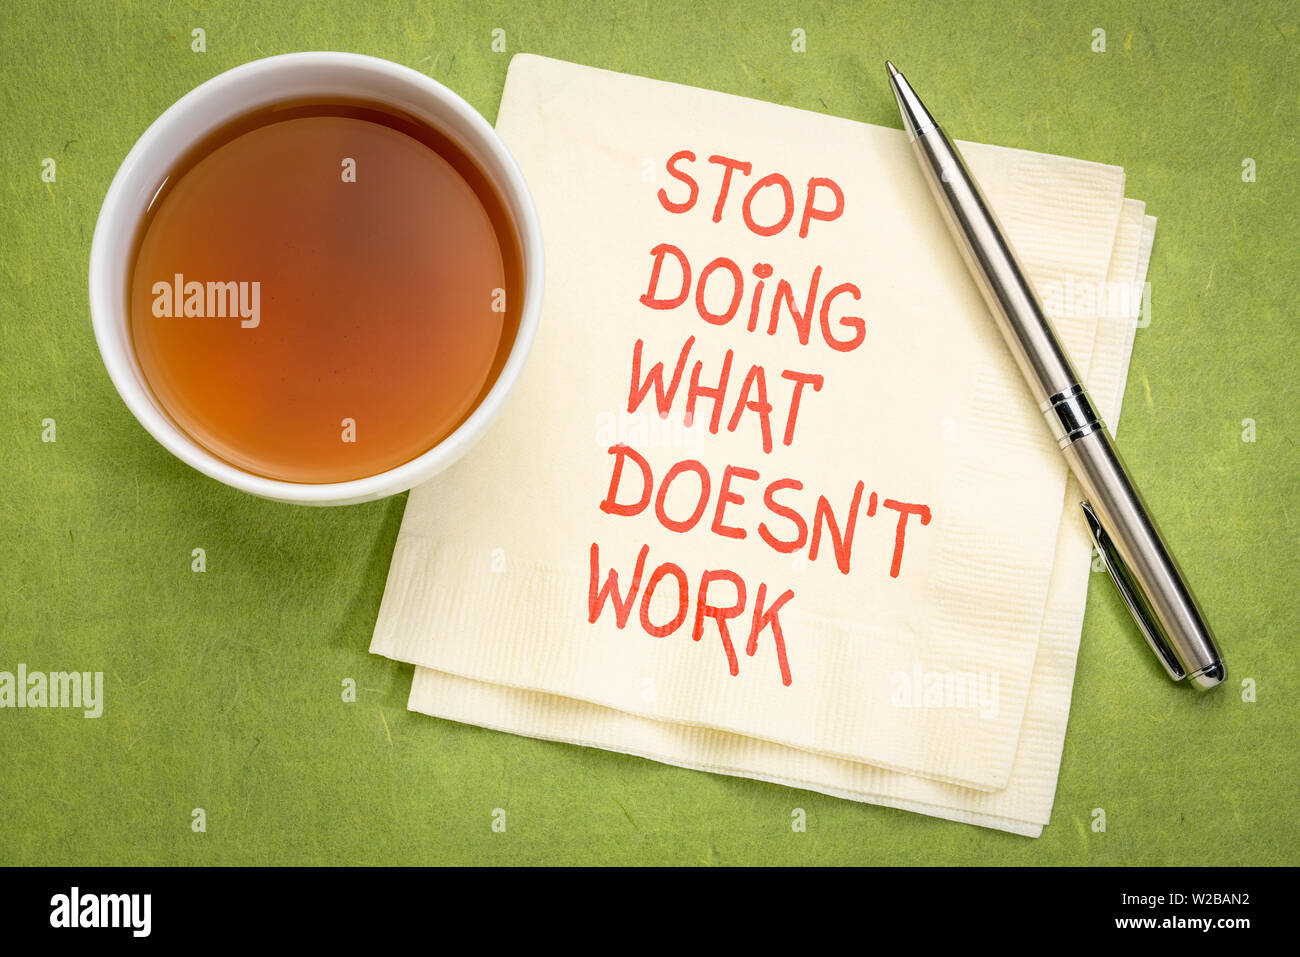 stop doing what does not work - motivational handwriting on a napkin with a cup of tea Stock Photo